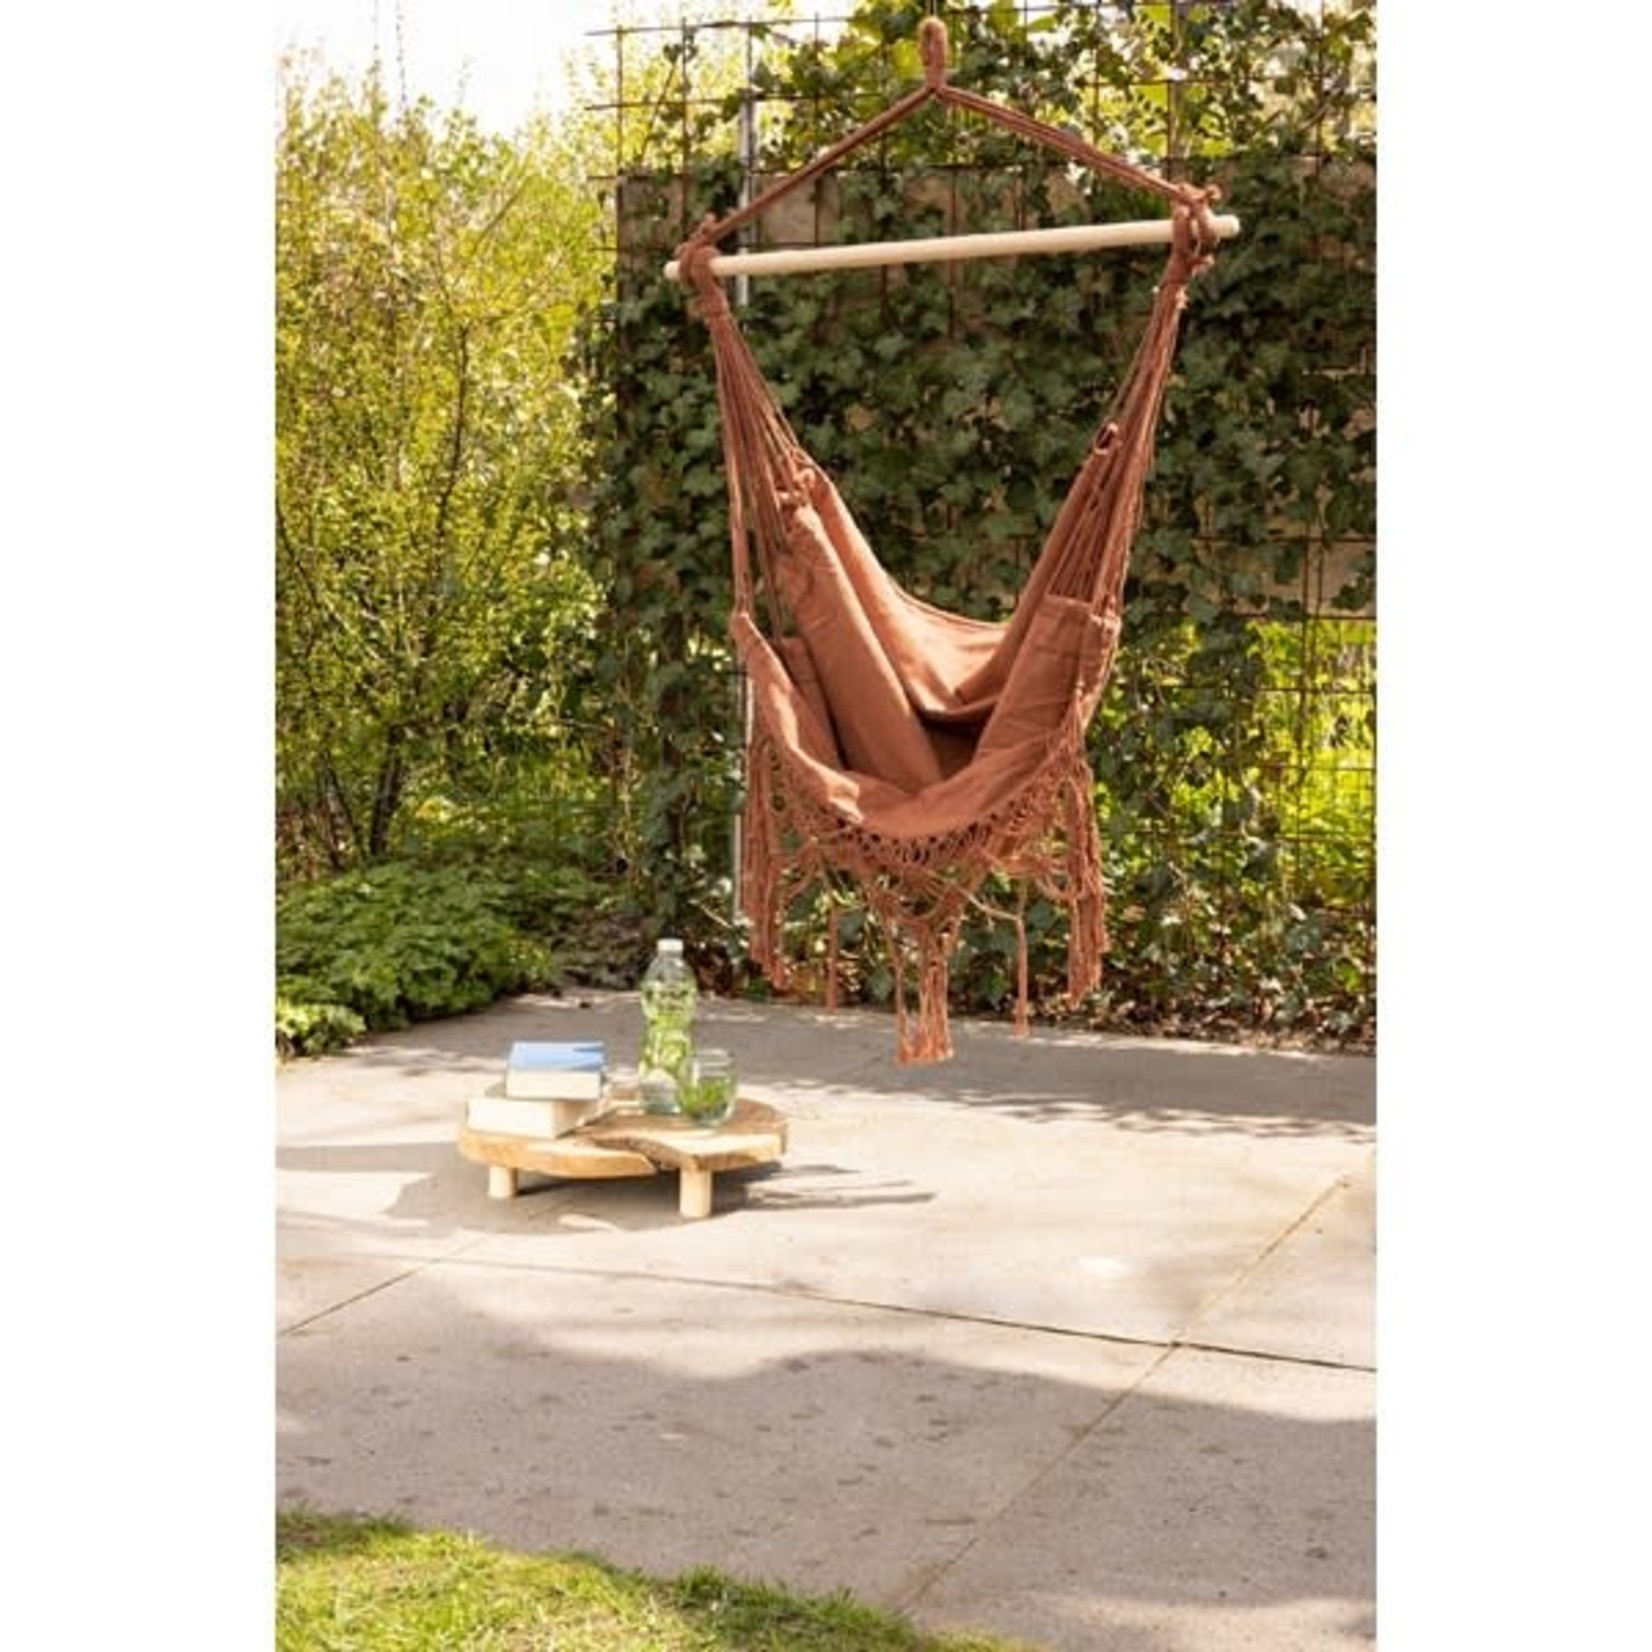 Decoris Hammock Cotton Hanging chair with tassle outdoor 3 Colours assorted (price is each)